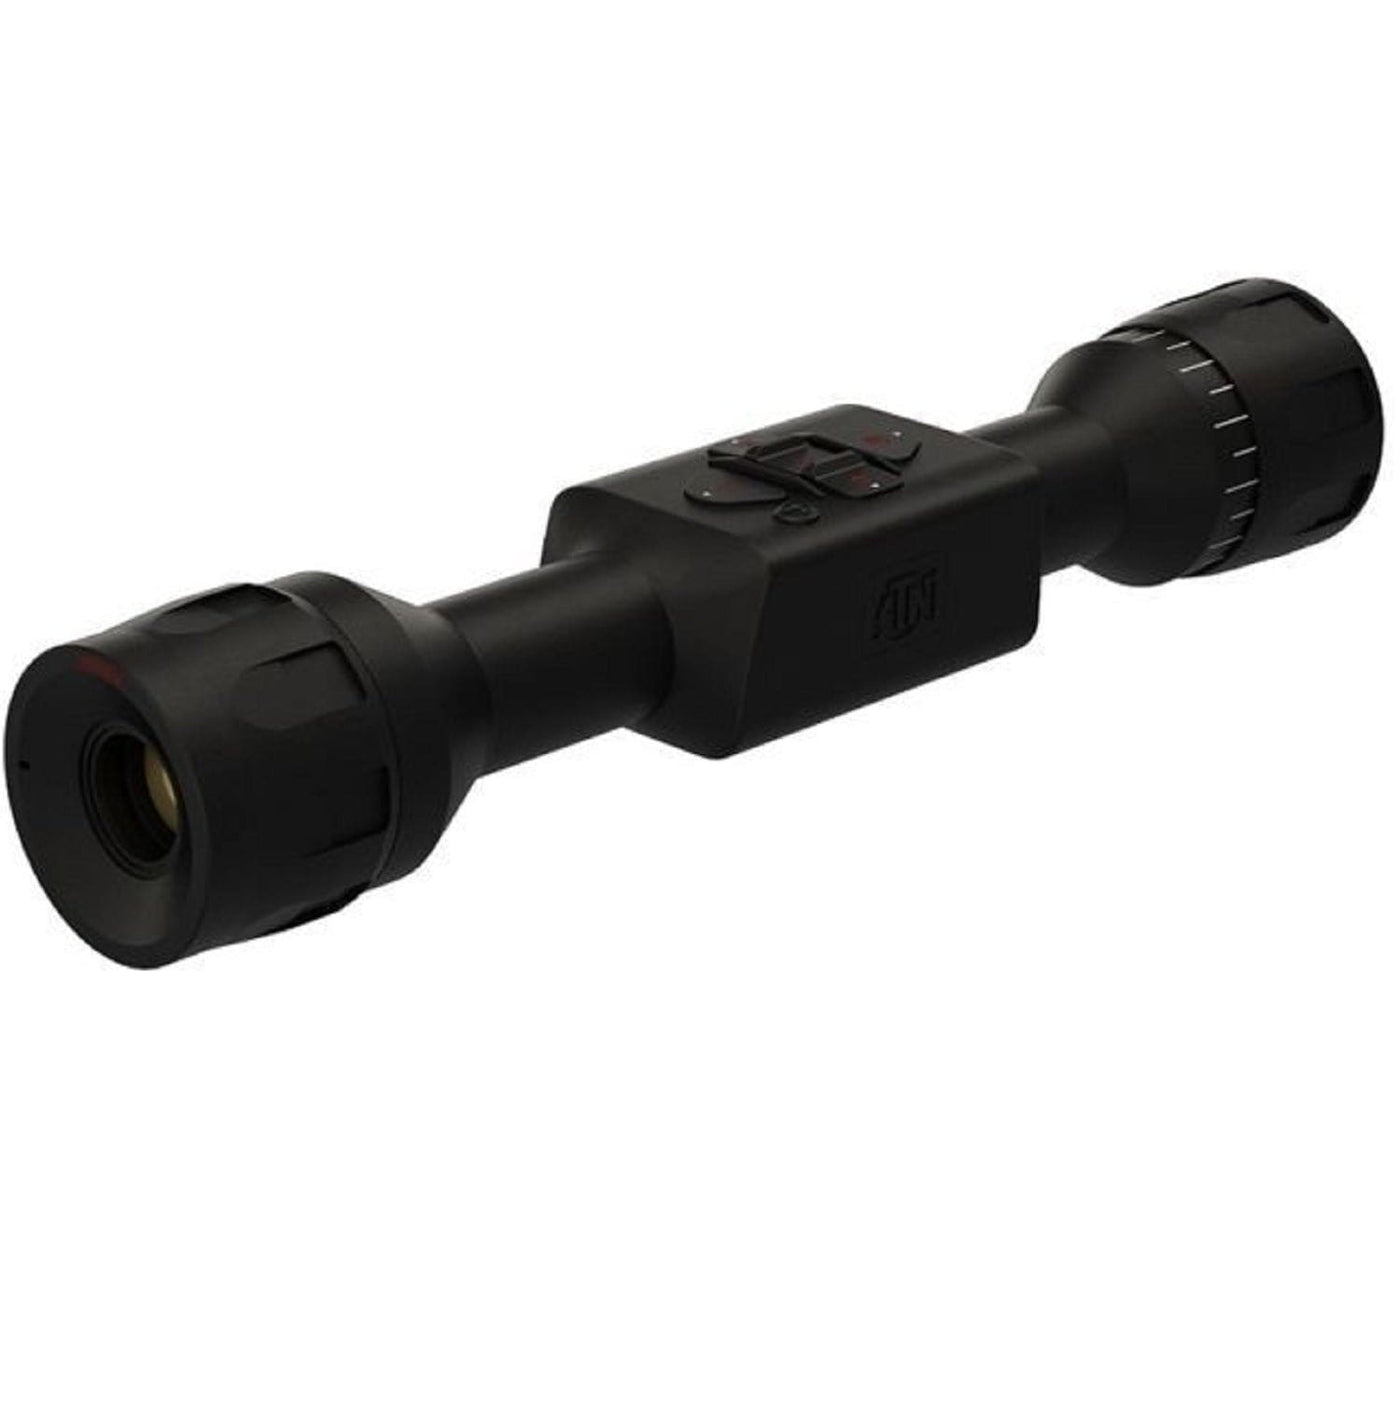 ATN ATN Thor-LT Thermal Rifle Scope 4-8x Nightvision And Thermal